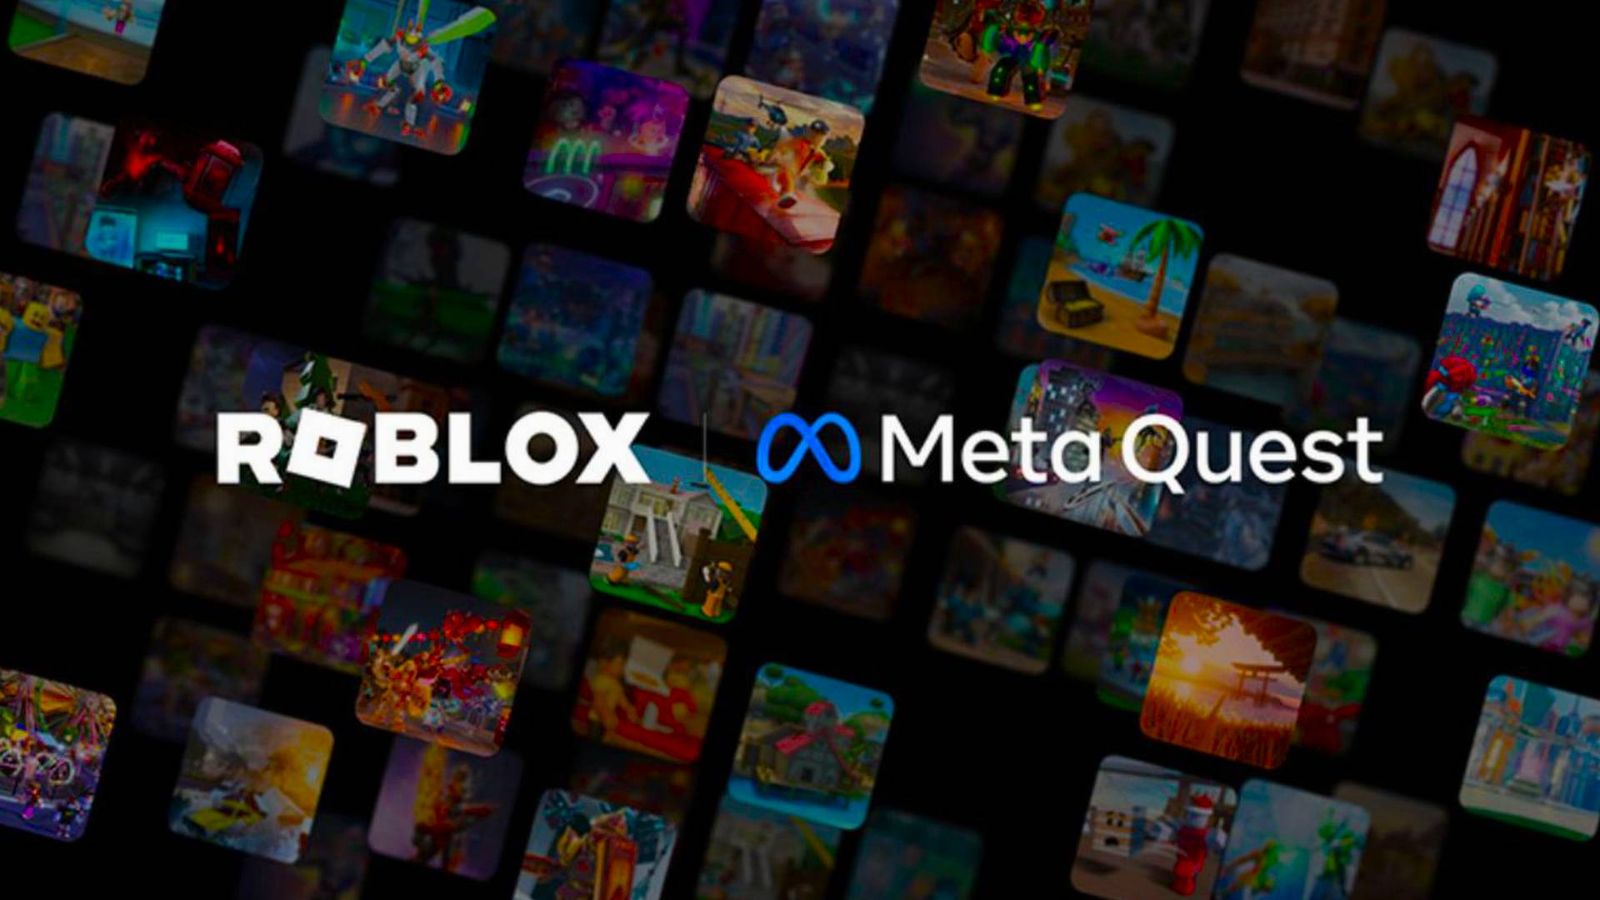 Is Roblox on Meta Quest 3 - An image with logos of Roblox and Meta Quest